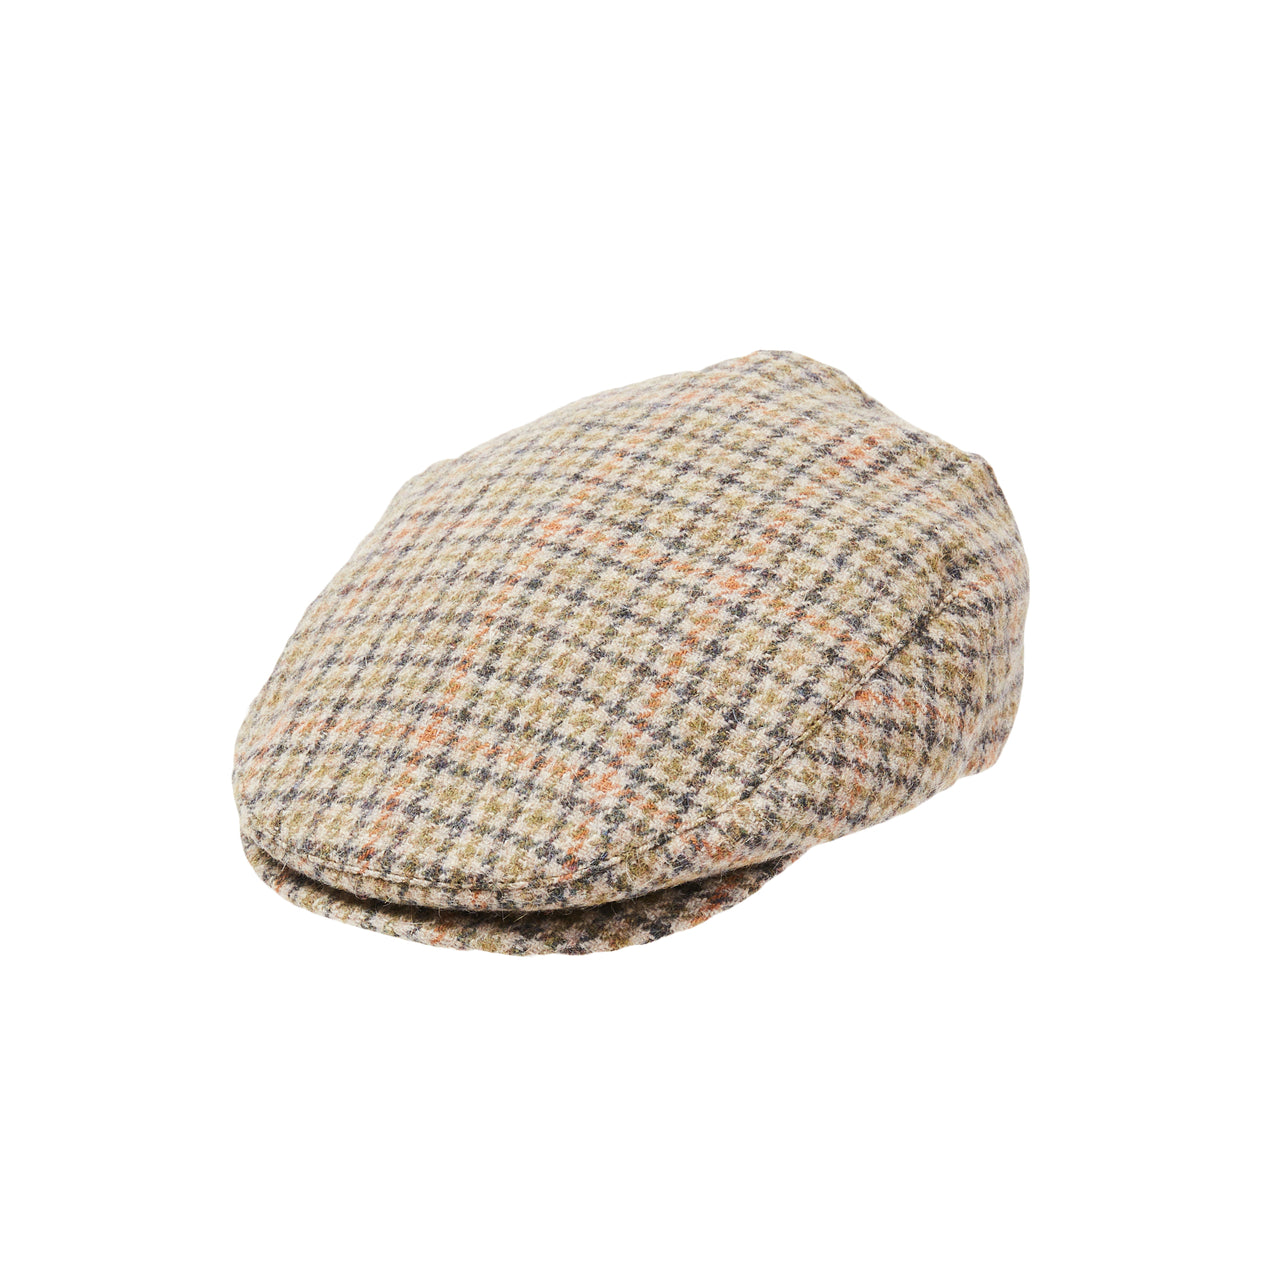 CITY HATTERS Louie Houndstooth Ivy Cap